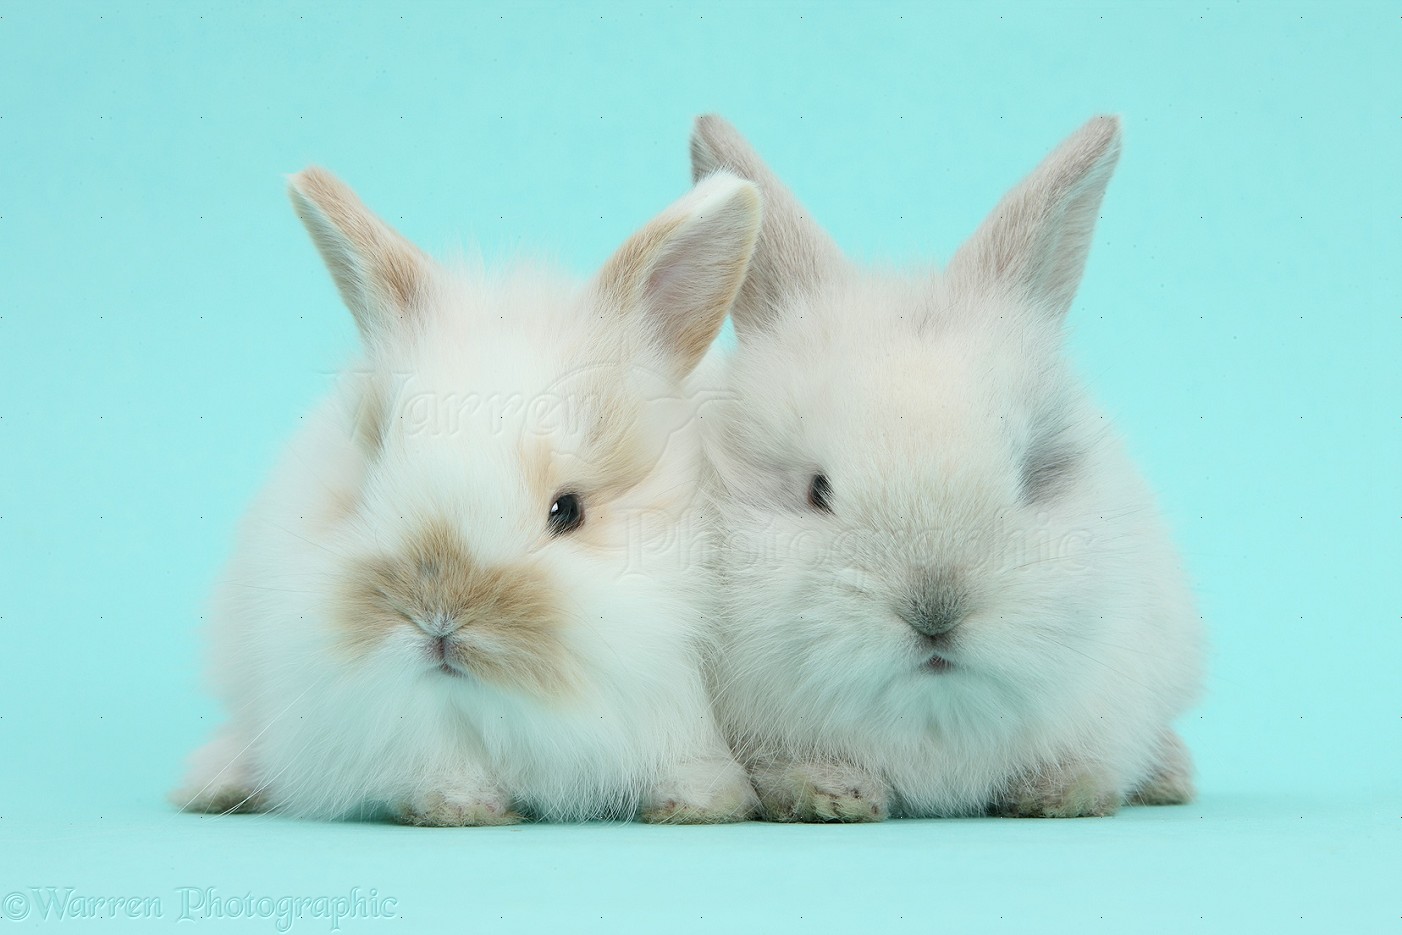 Cute Baby Bunnies On Blue Background Photo Wp40458